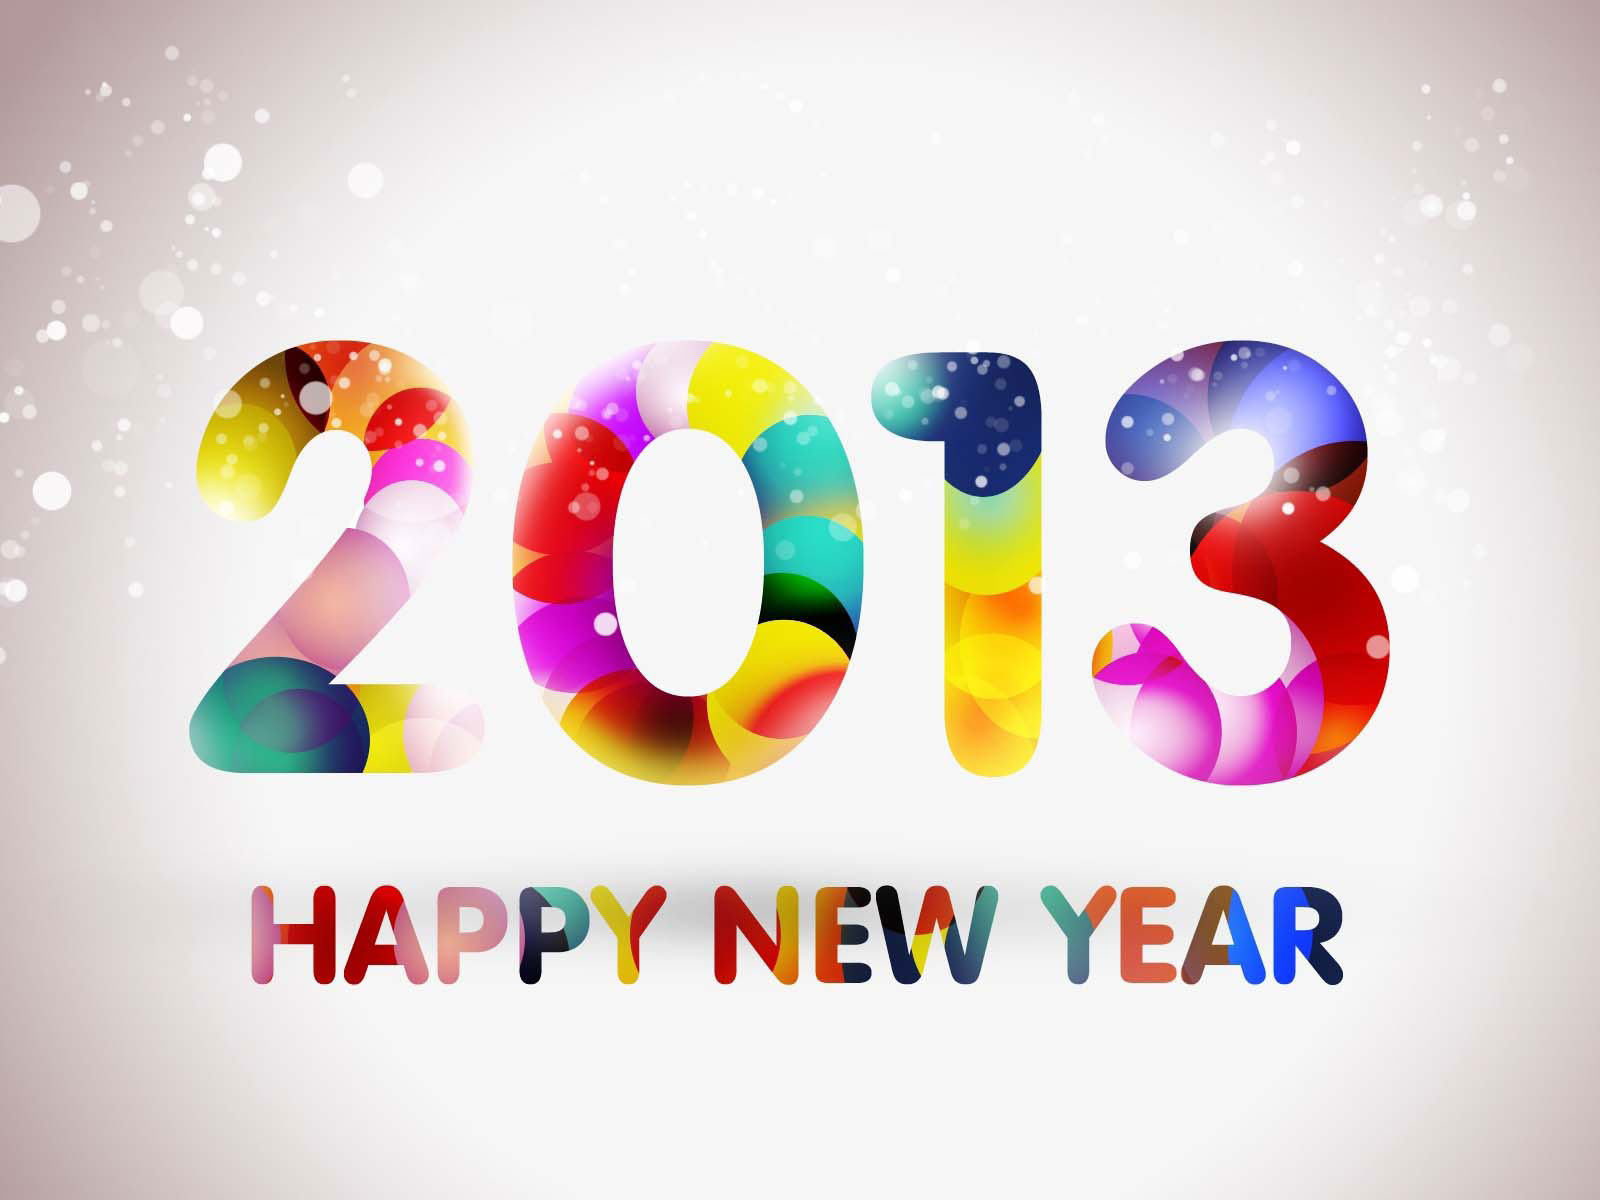 Collection Of Beautiful Happy New Year 2013 Wallpapers 